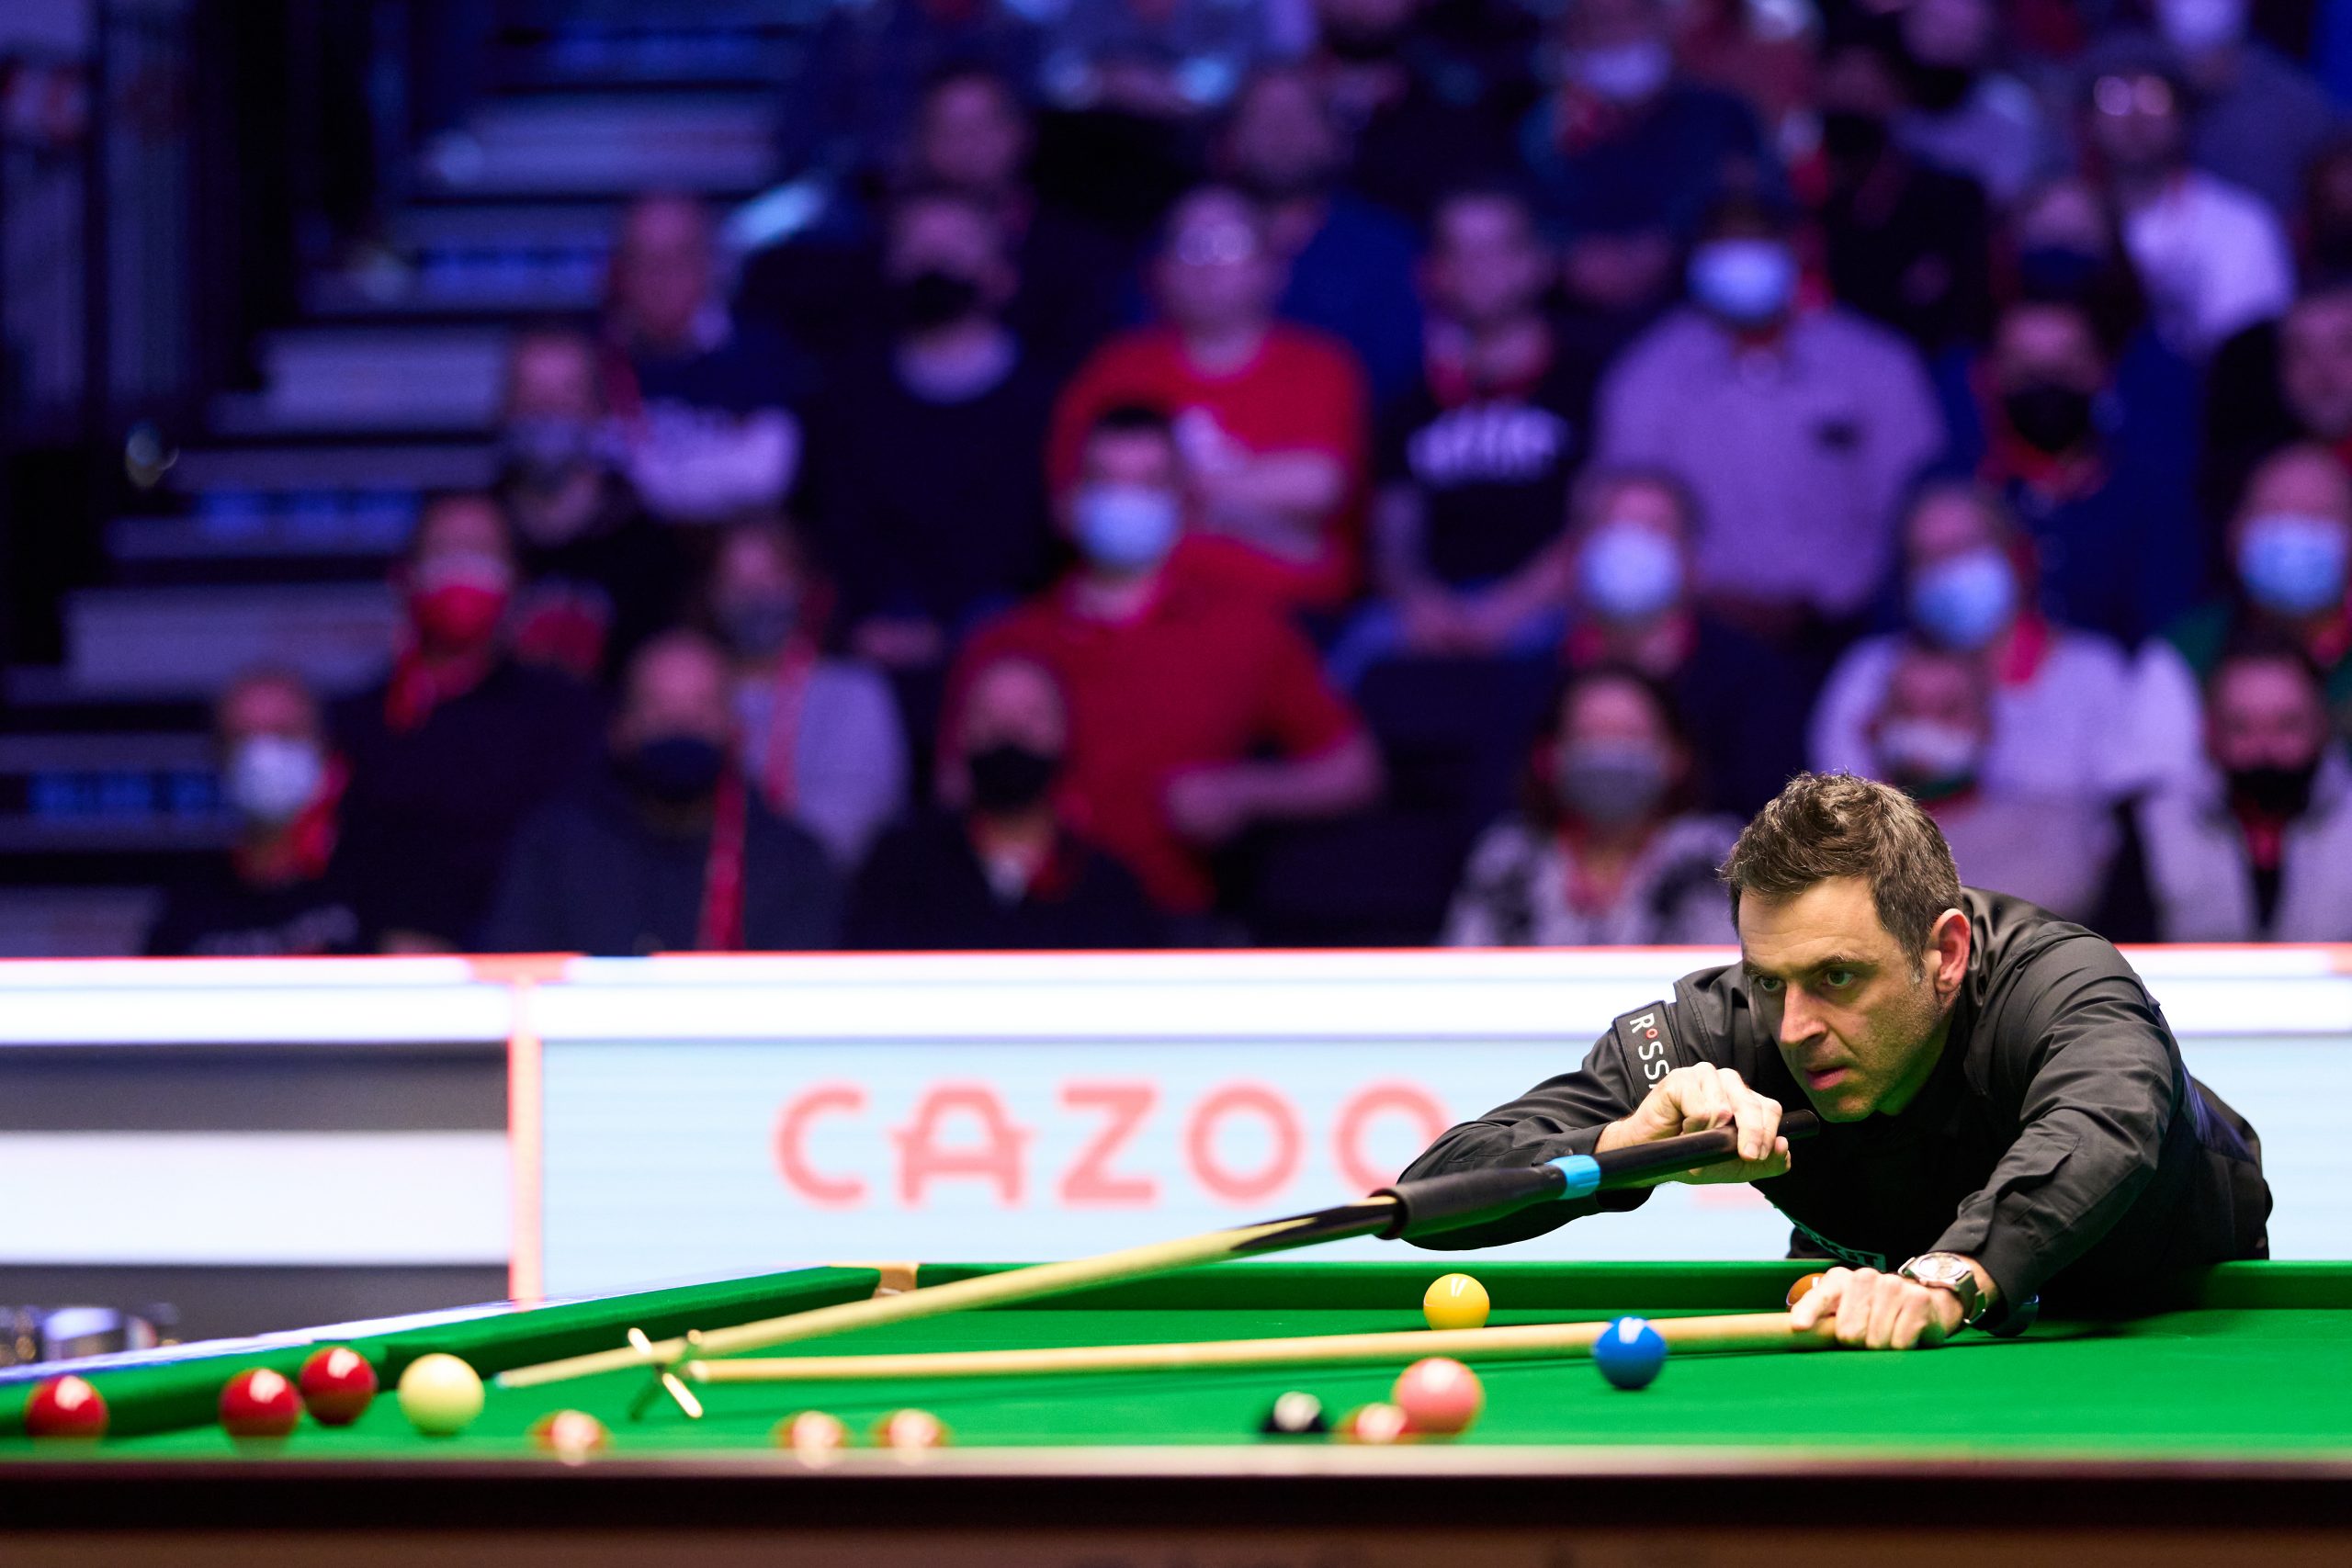 Cazoo shrugs off concerns over profitability to become title sponsor of World Snooker Championship